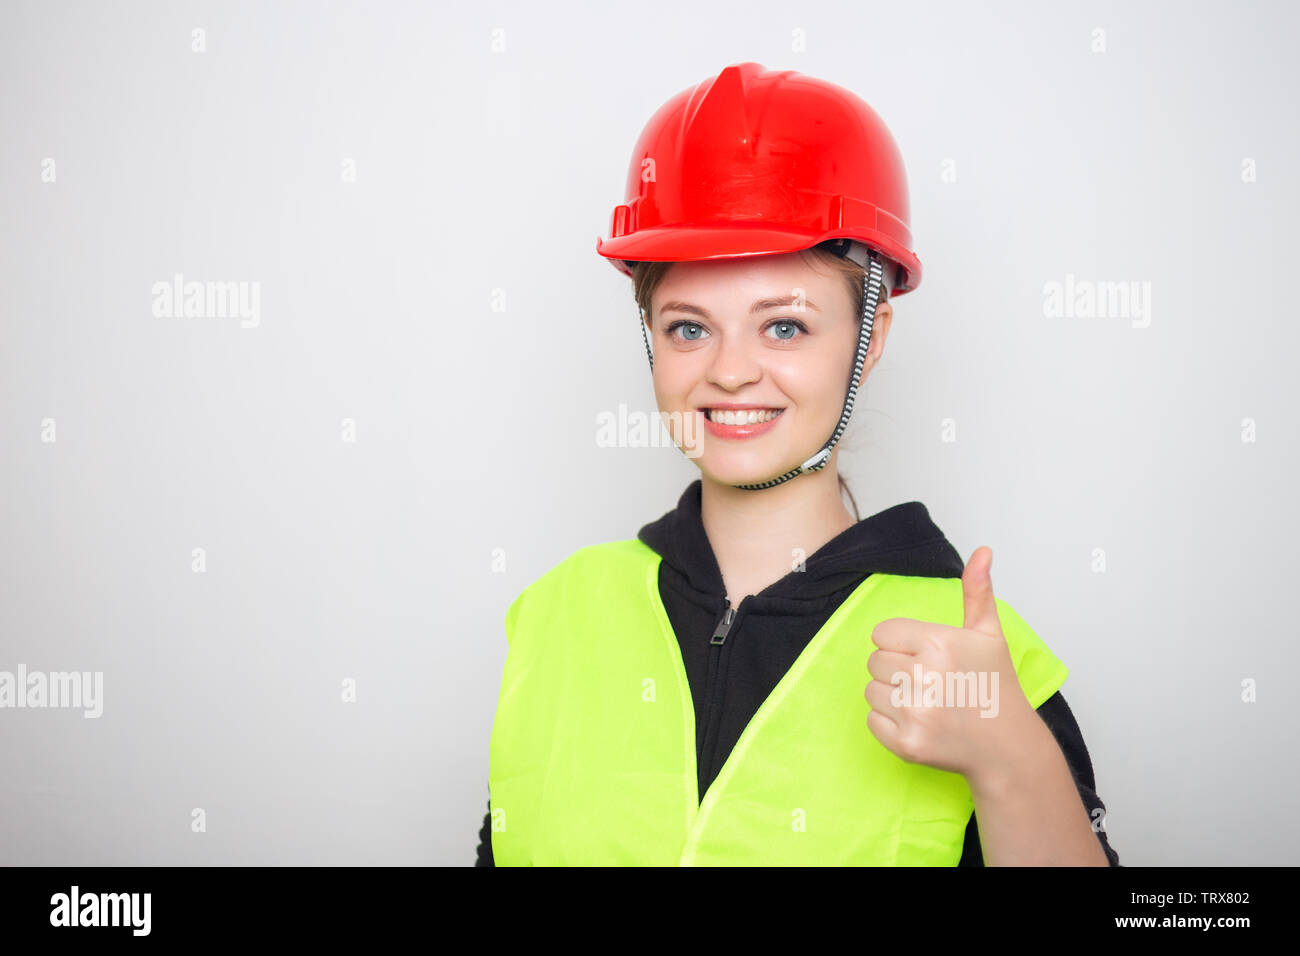 Young caucasian woman wearing red safety hard hat and reflective vest, smiling with thumbs up Stock Photo